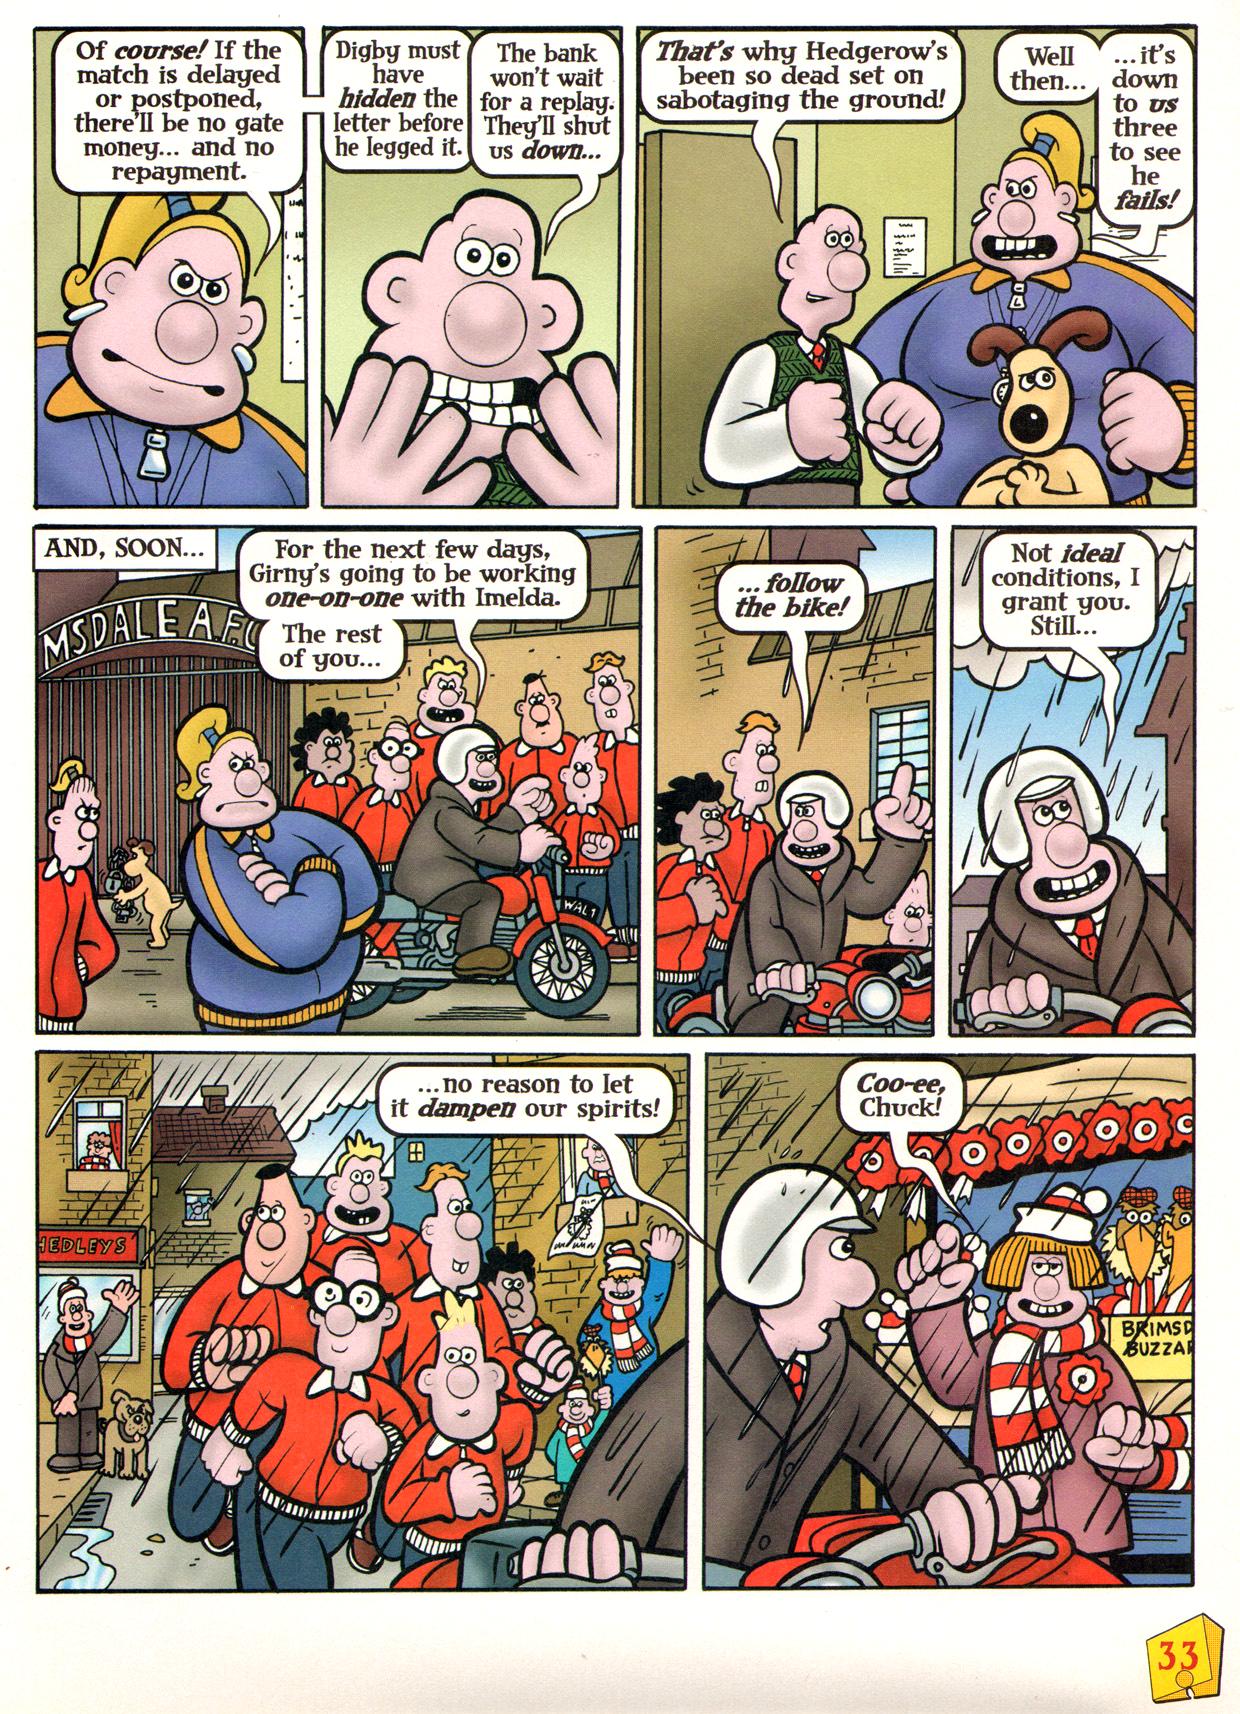 Read online Wallace & Gromit Comic comic -  Issue #11 - 31